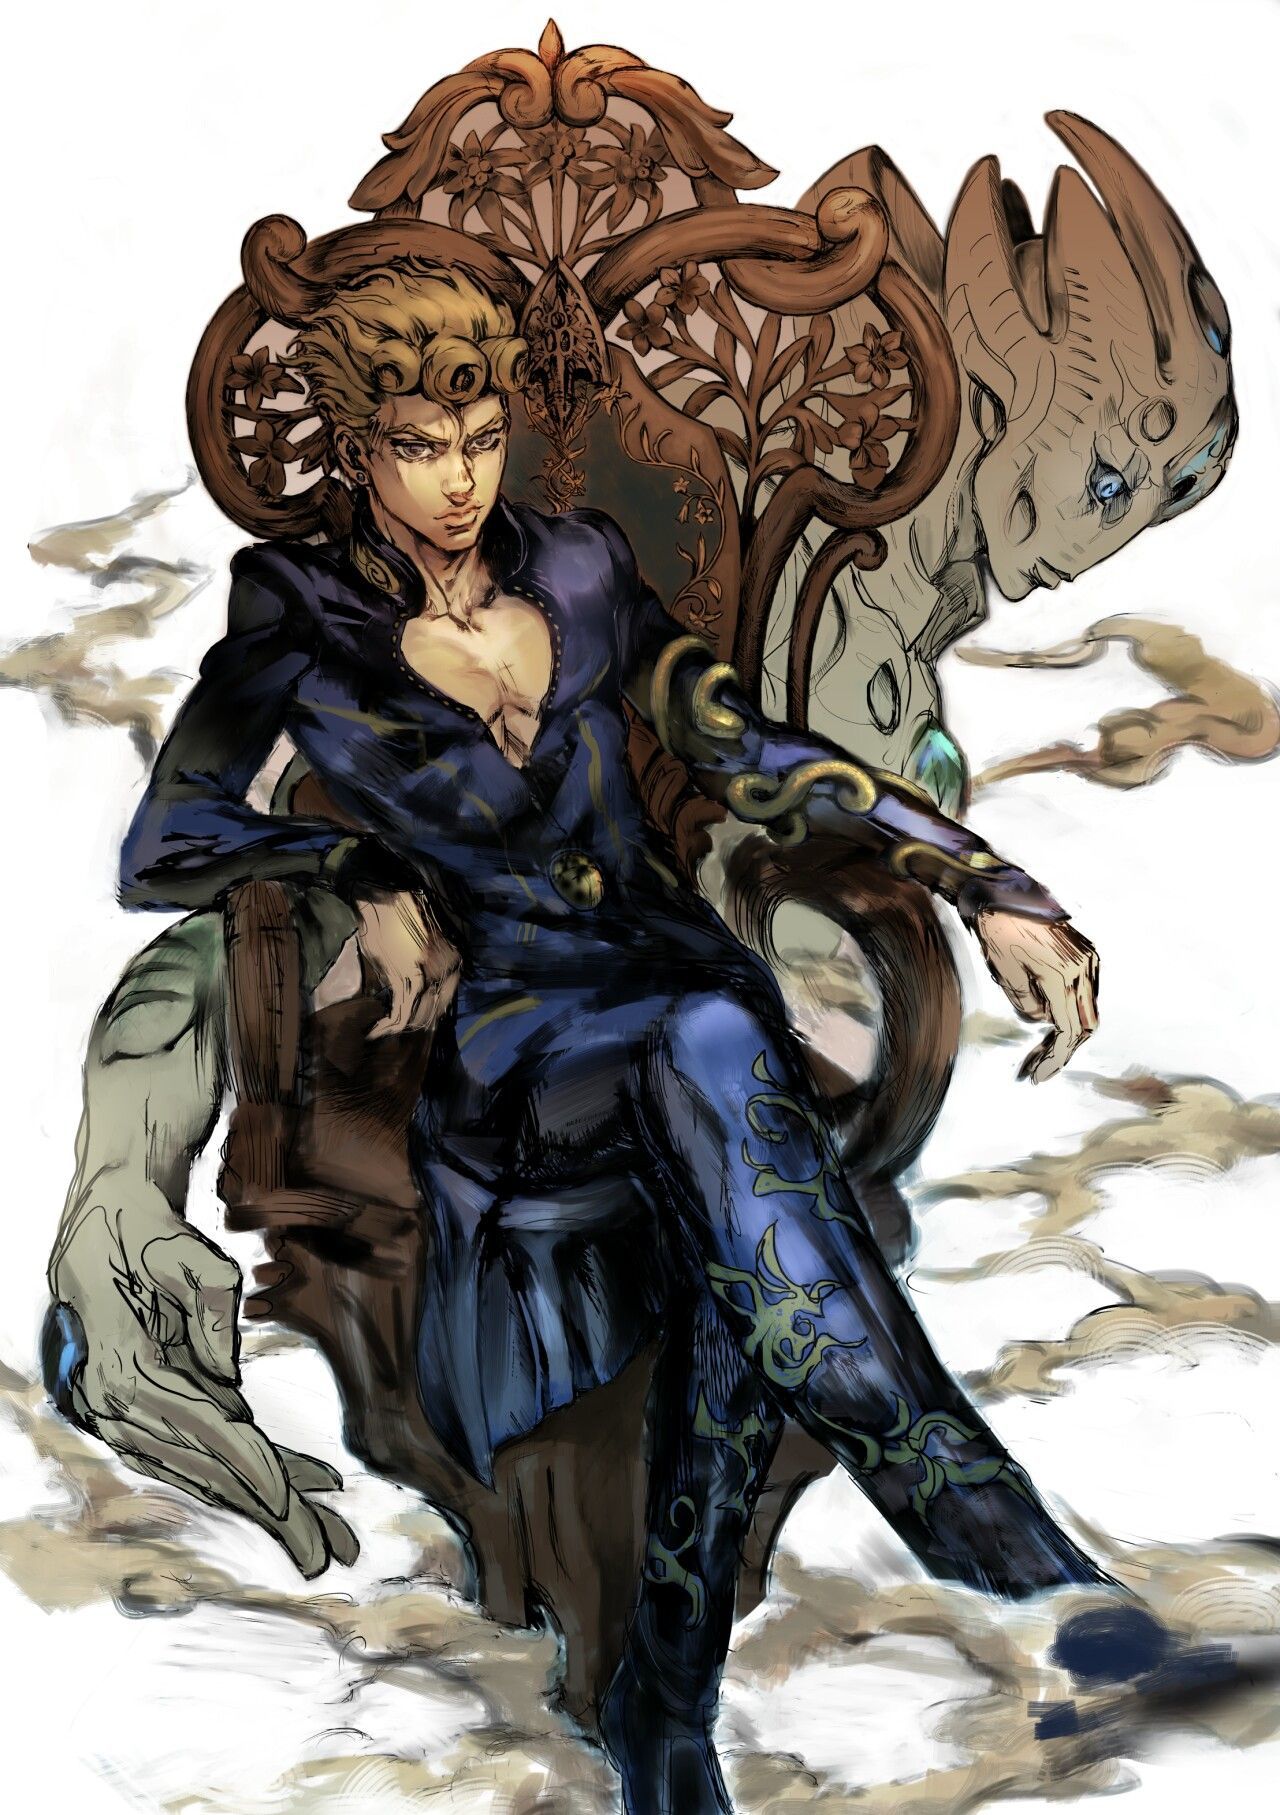 What-If] Gold Experience Requiem VS Tusk Act 4 (Giorno VS Johnny). 